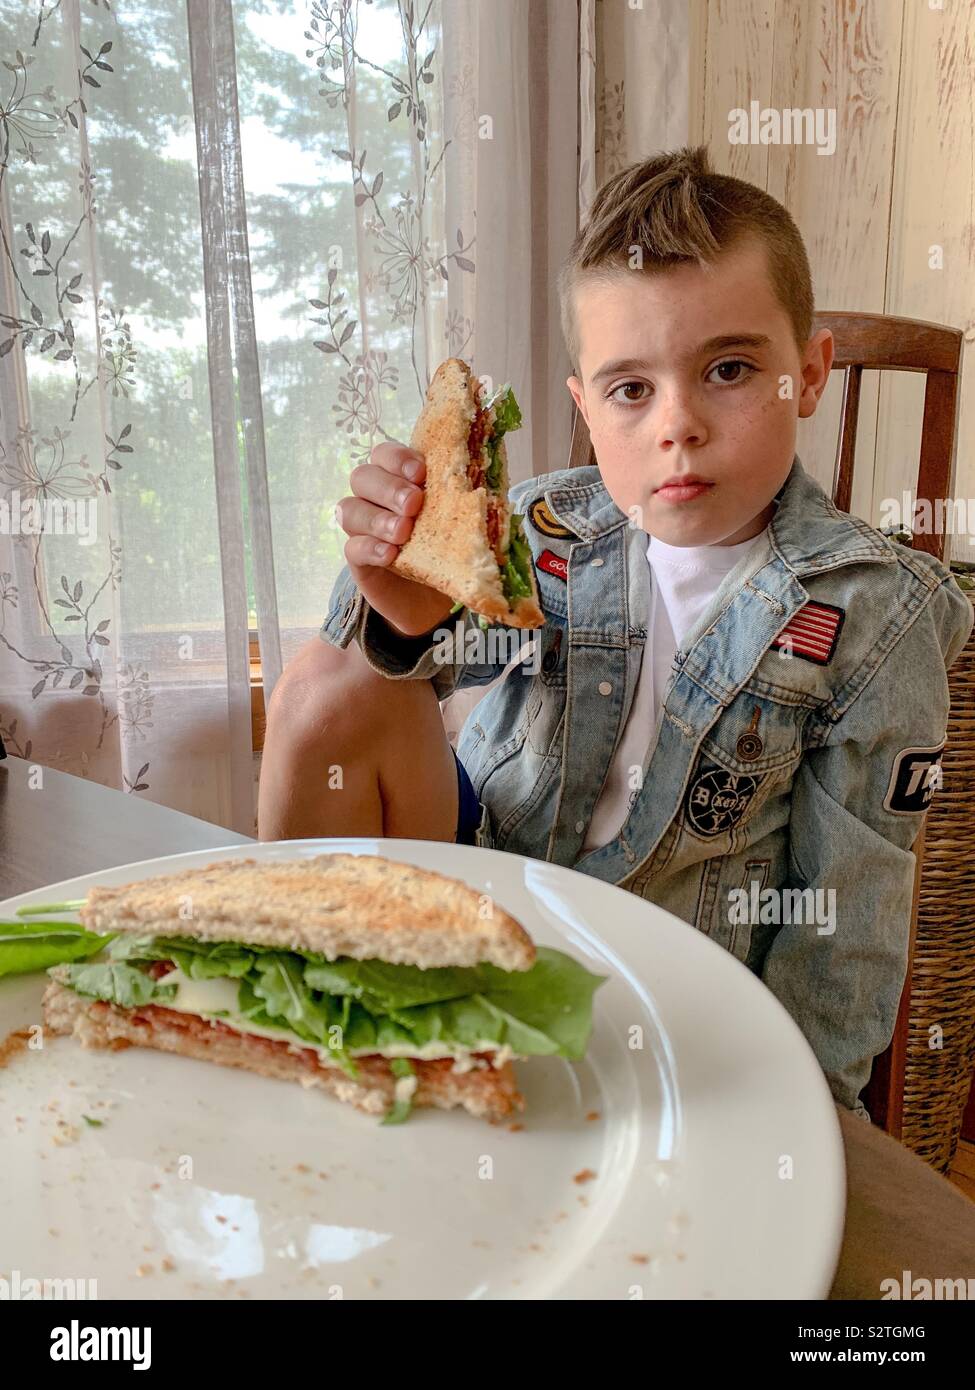 A nine year old boy eating a sandwich Stock Photo